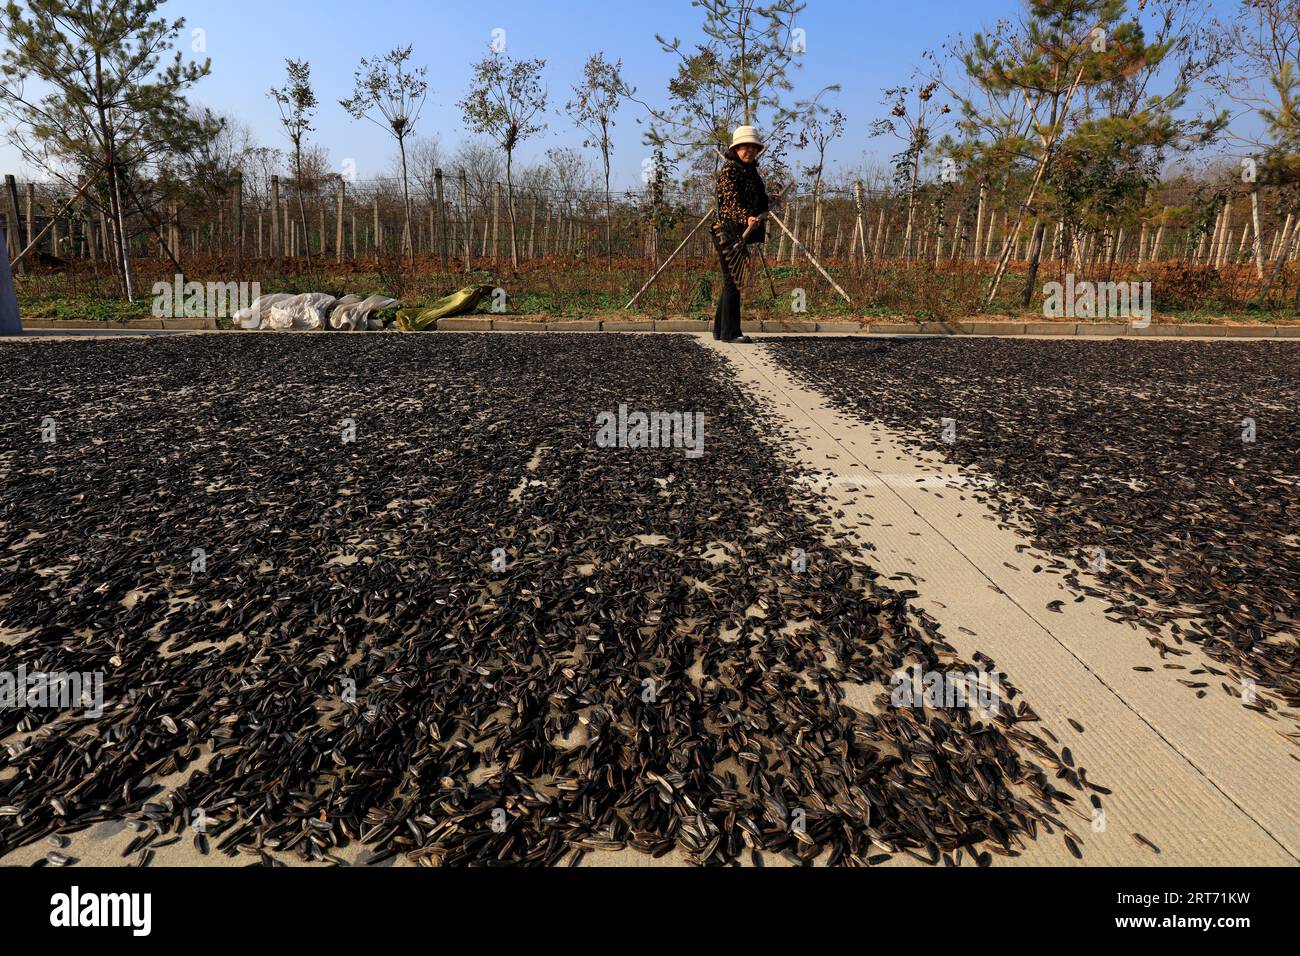 Yi County, China - November 4, 2017: Farmers are drying sunflower seeds on the ground, Yi County, Hebei Province, China Stock Photo